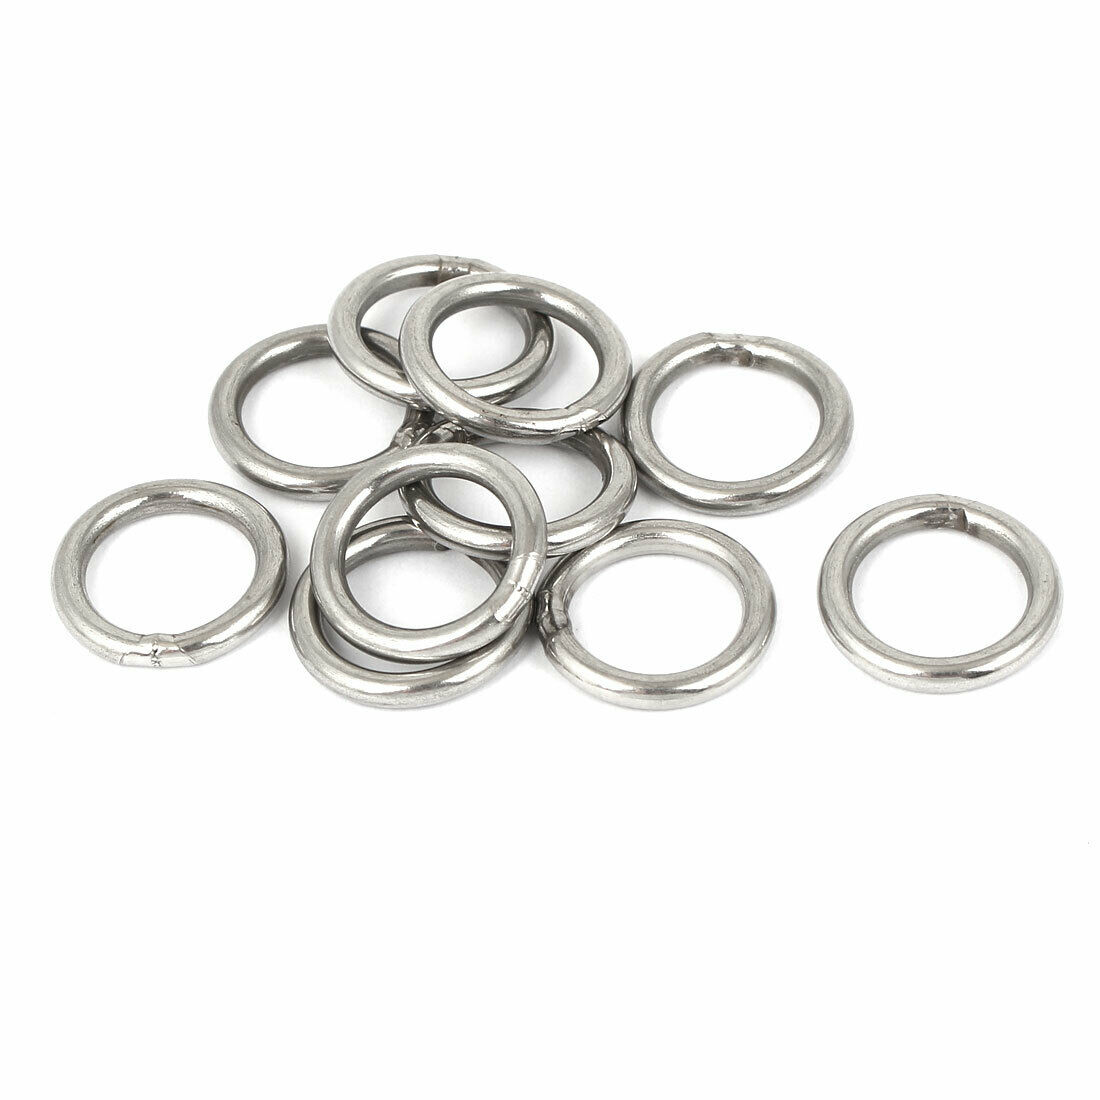 20mm X 15mm X 3mm Stainless Steel Welded Ring Silver Tone 10pcs